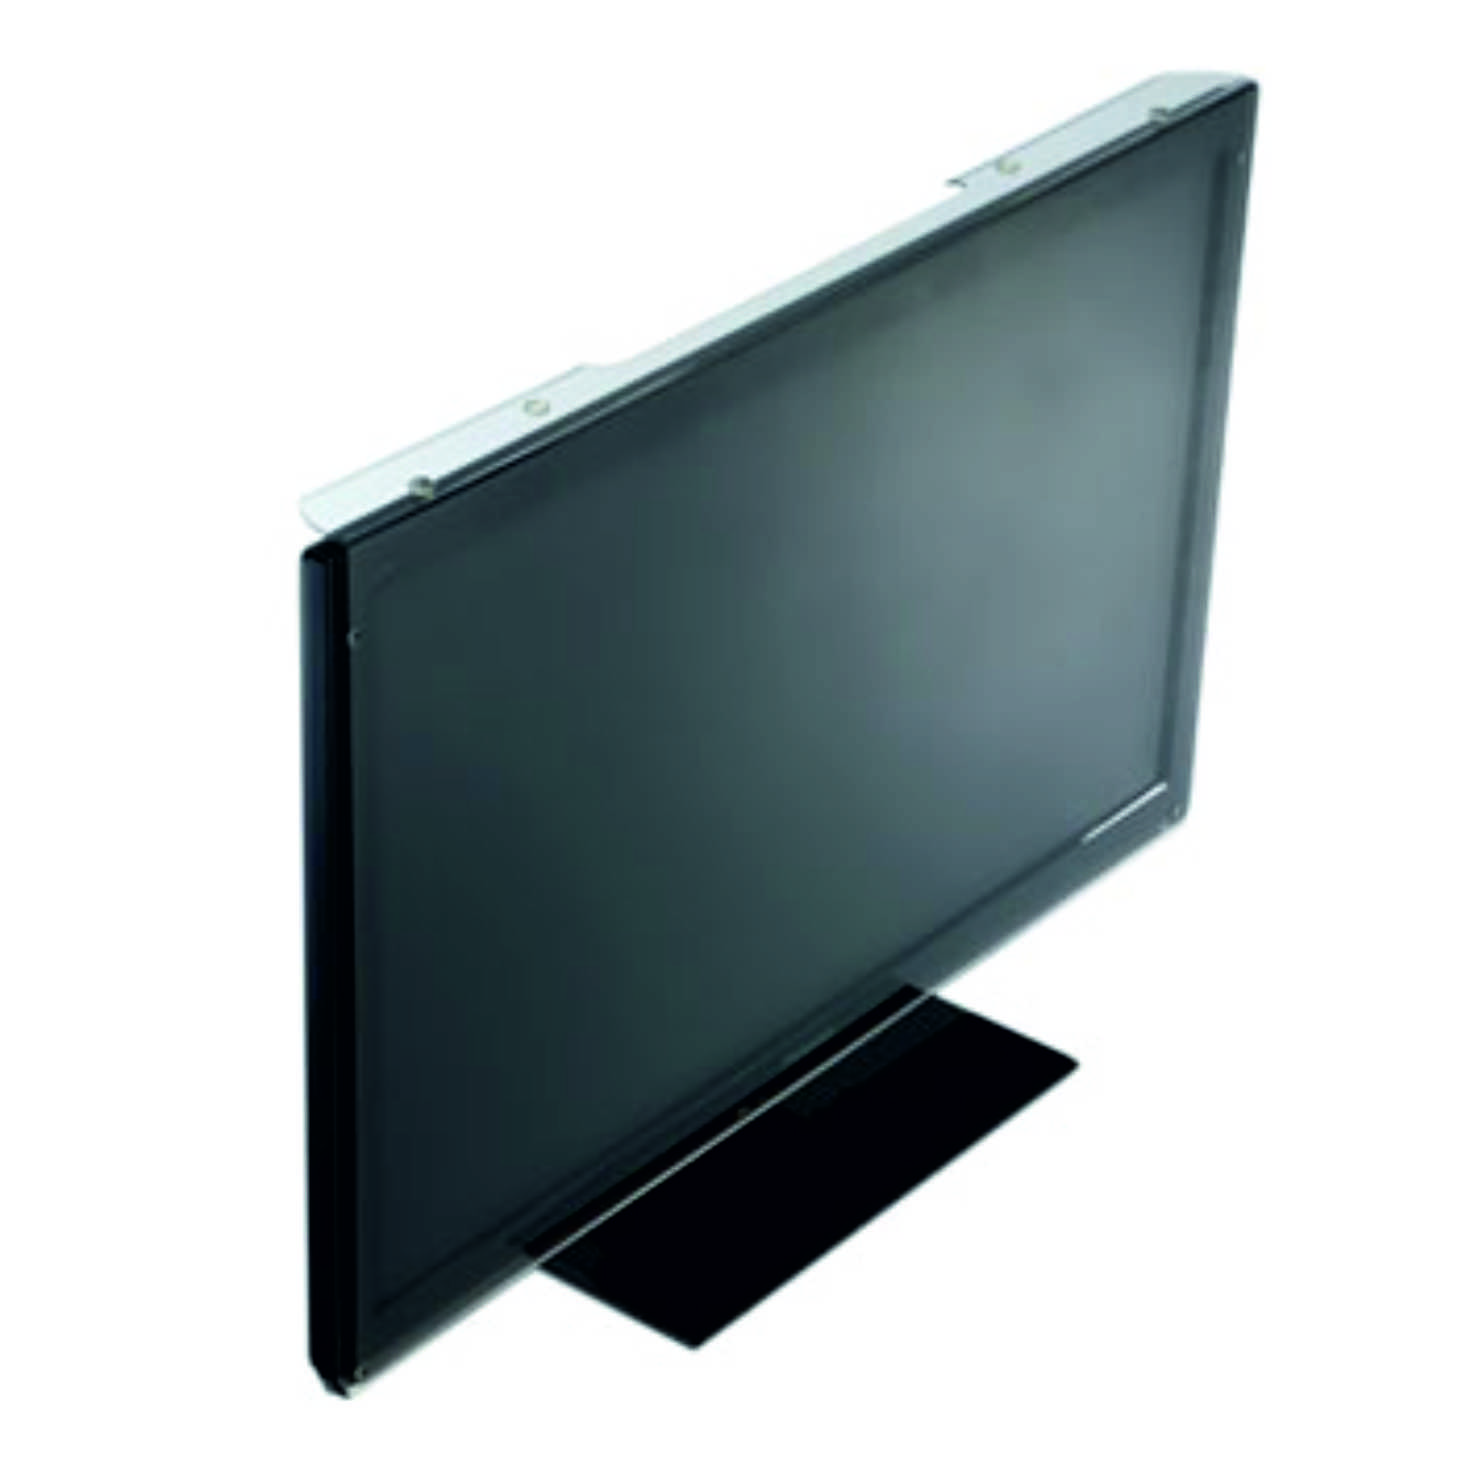 32 Inch TVGUARD NonBreakable Screen Protector For LED LCD 3D Plasma TV at Best Prices